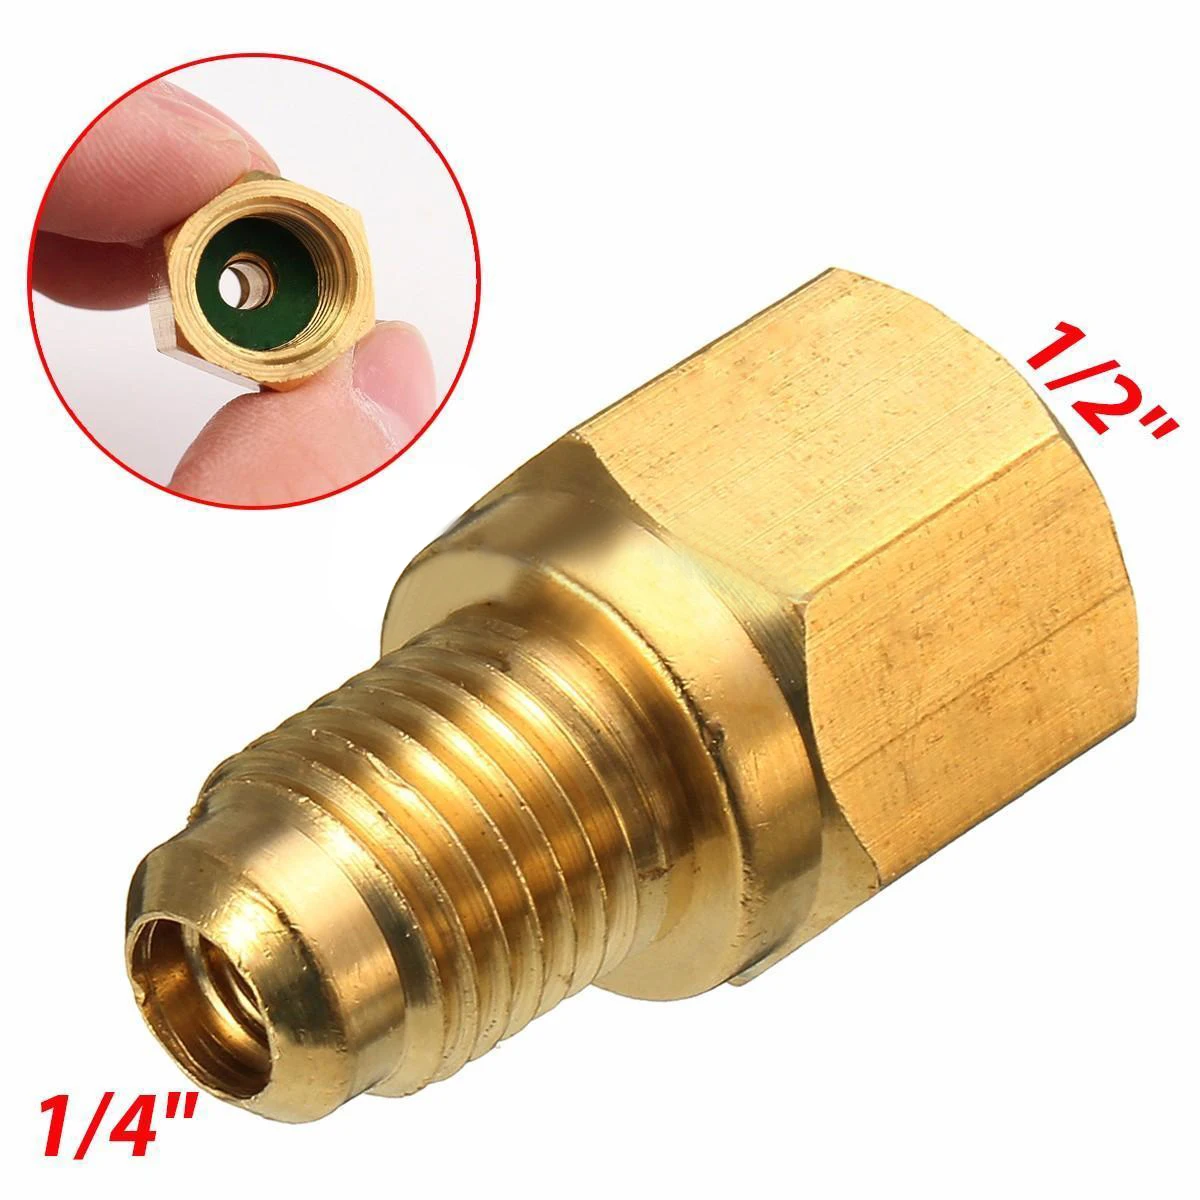 

R134a Refrigerant Tank Adapter 1/2" ACME Female x 1/4" Male Flare Fitting Tool accessories